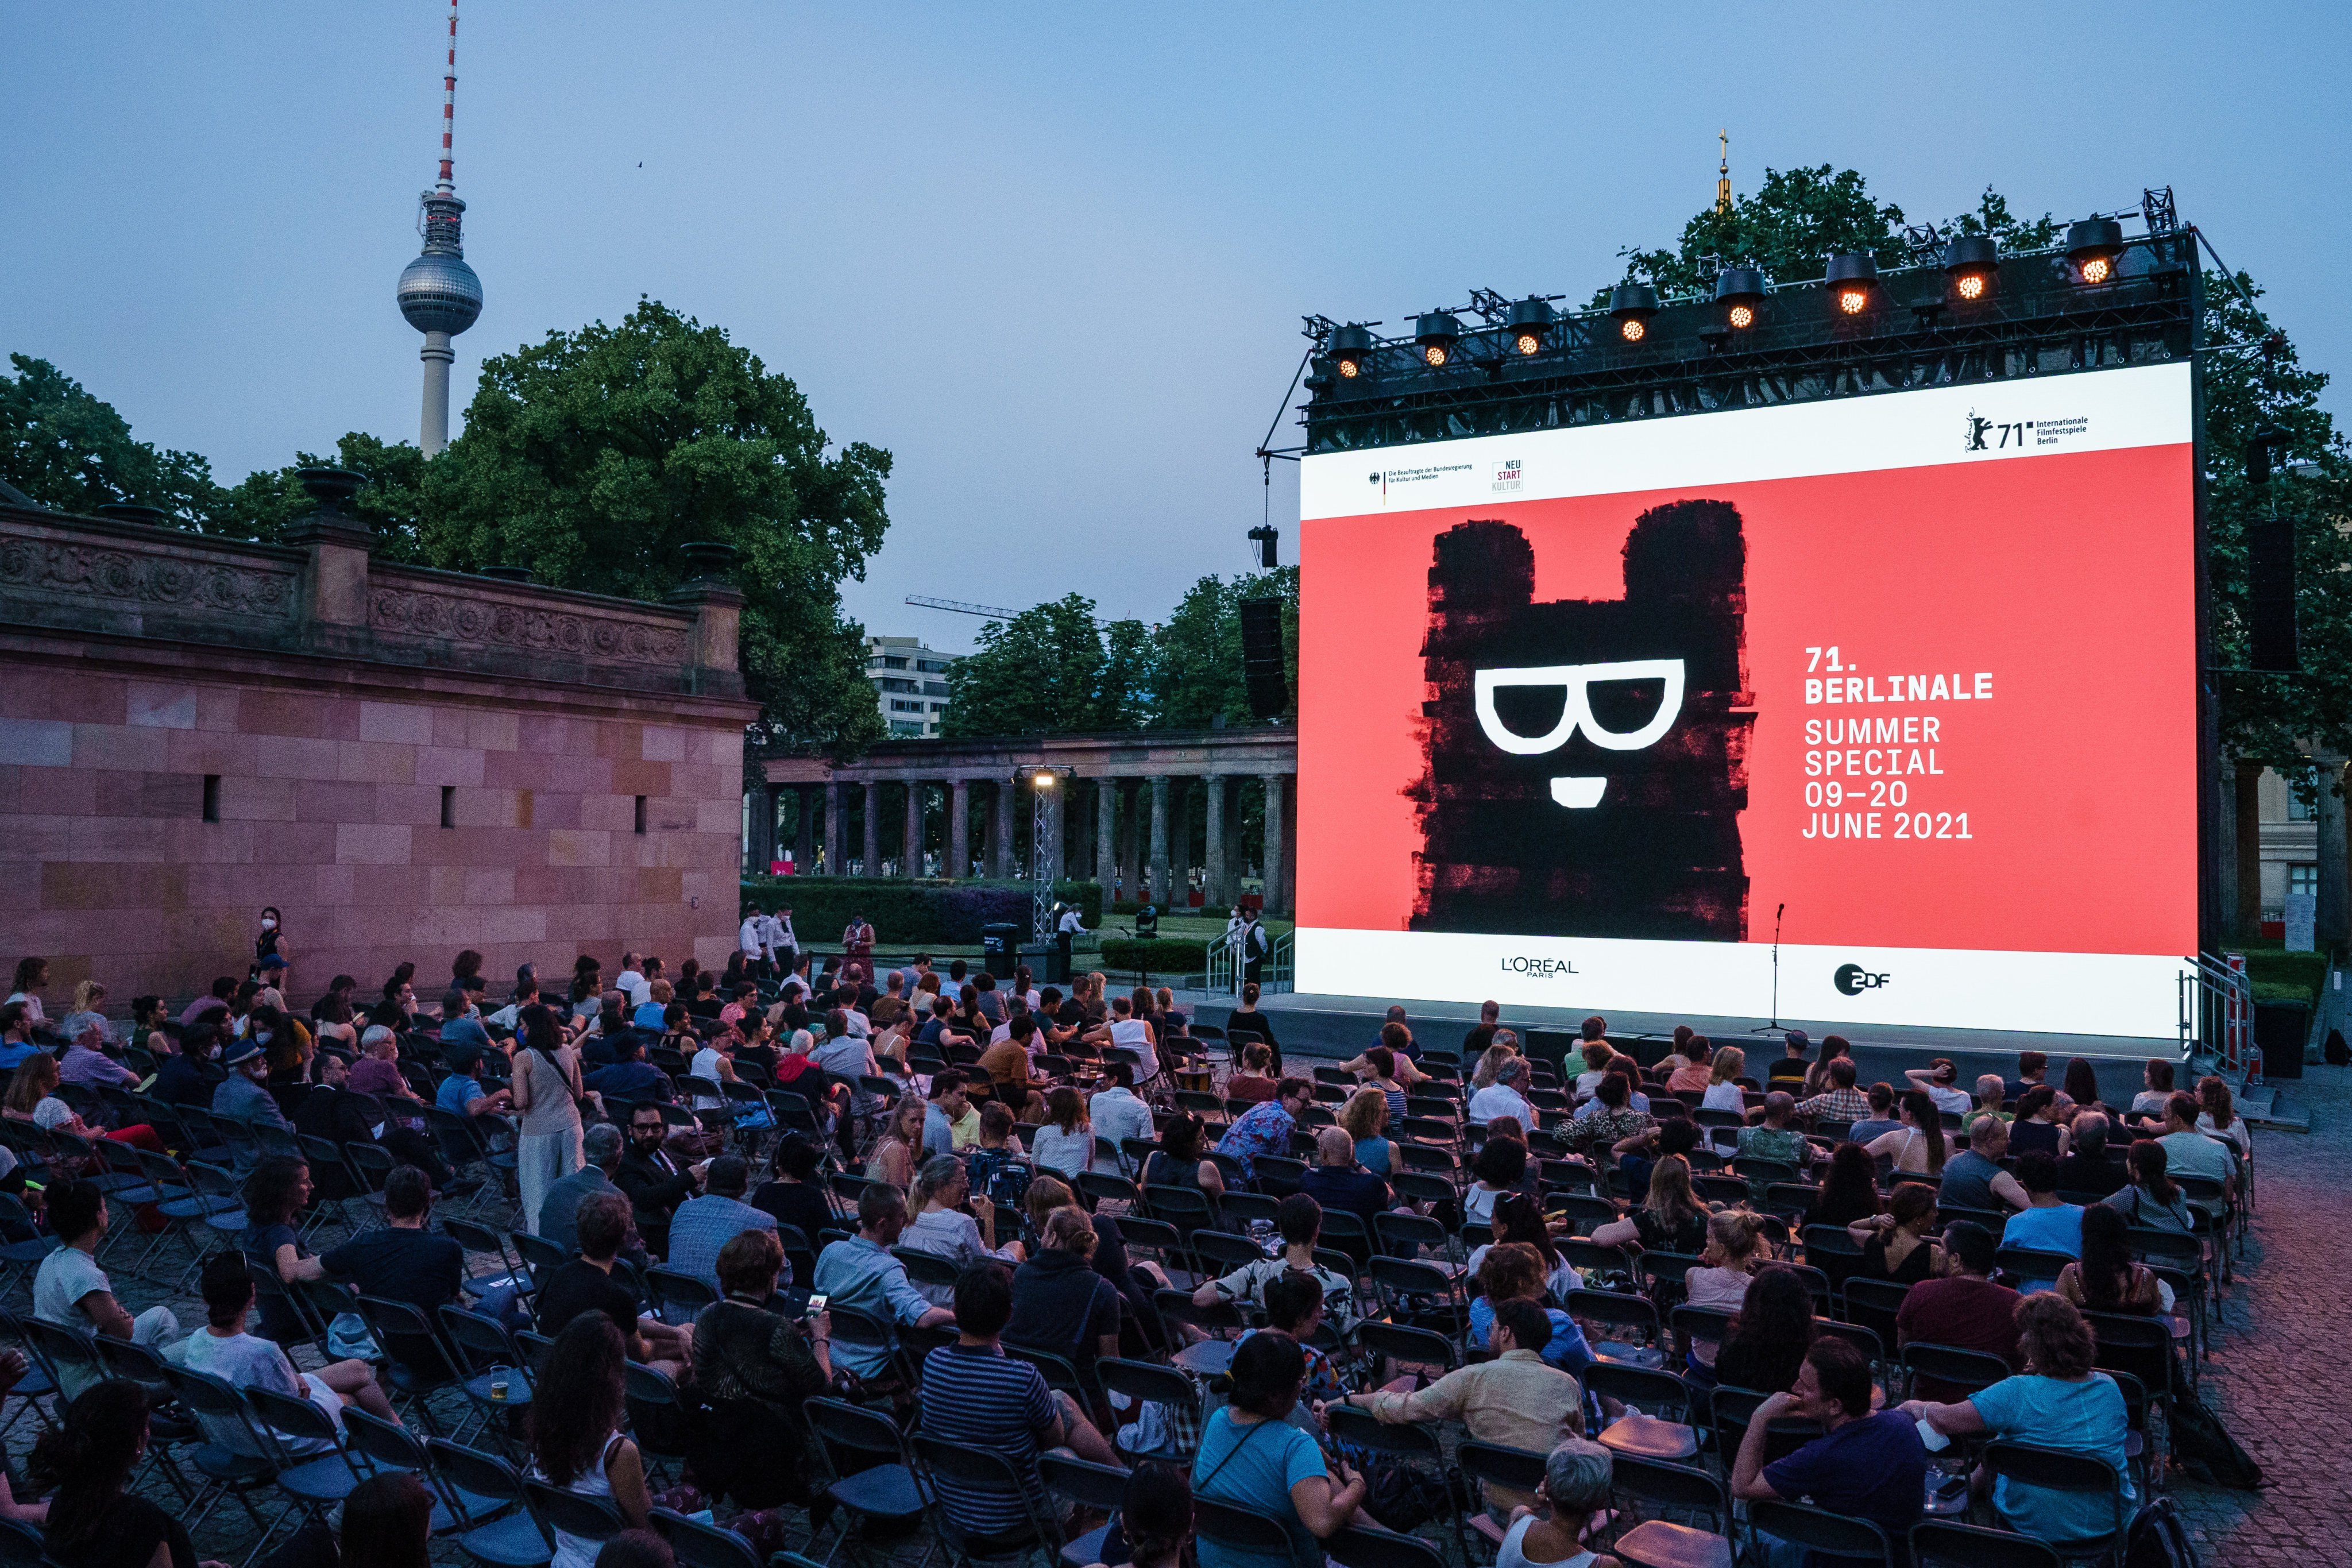 The 71st Berlinale Summer Special was held as an outdoor-only event in June 2021. Many of the world’s major film festivals are pivoting to online screenings again for 2022 as Covid-19 cases rise. Photo: Getty Images